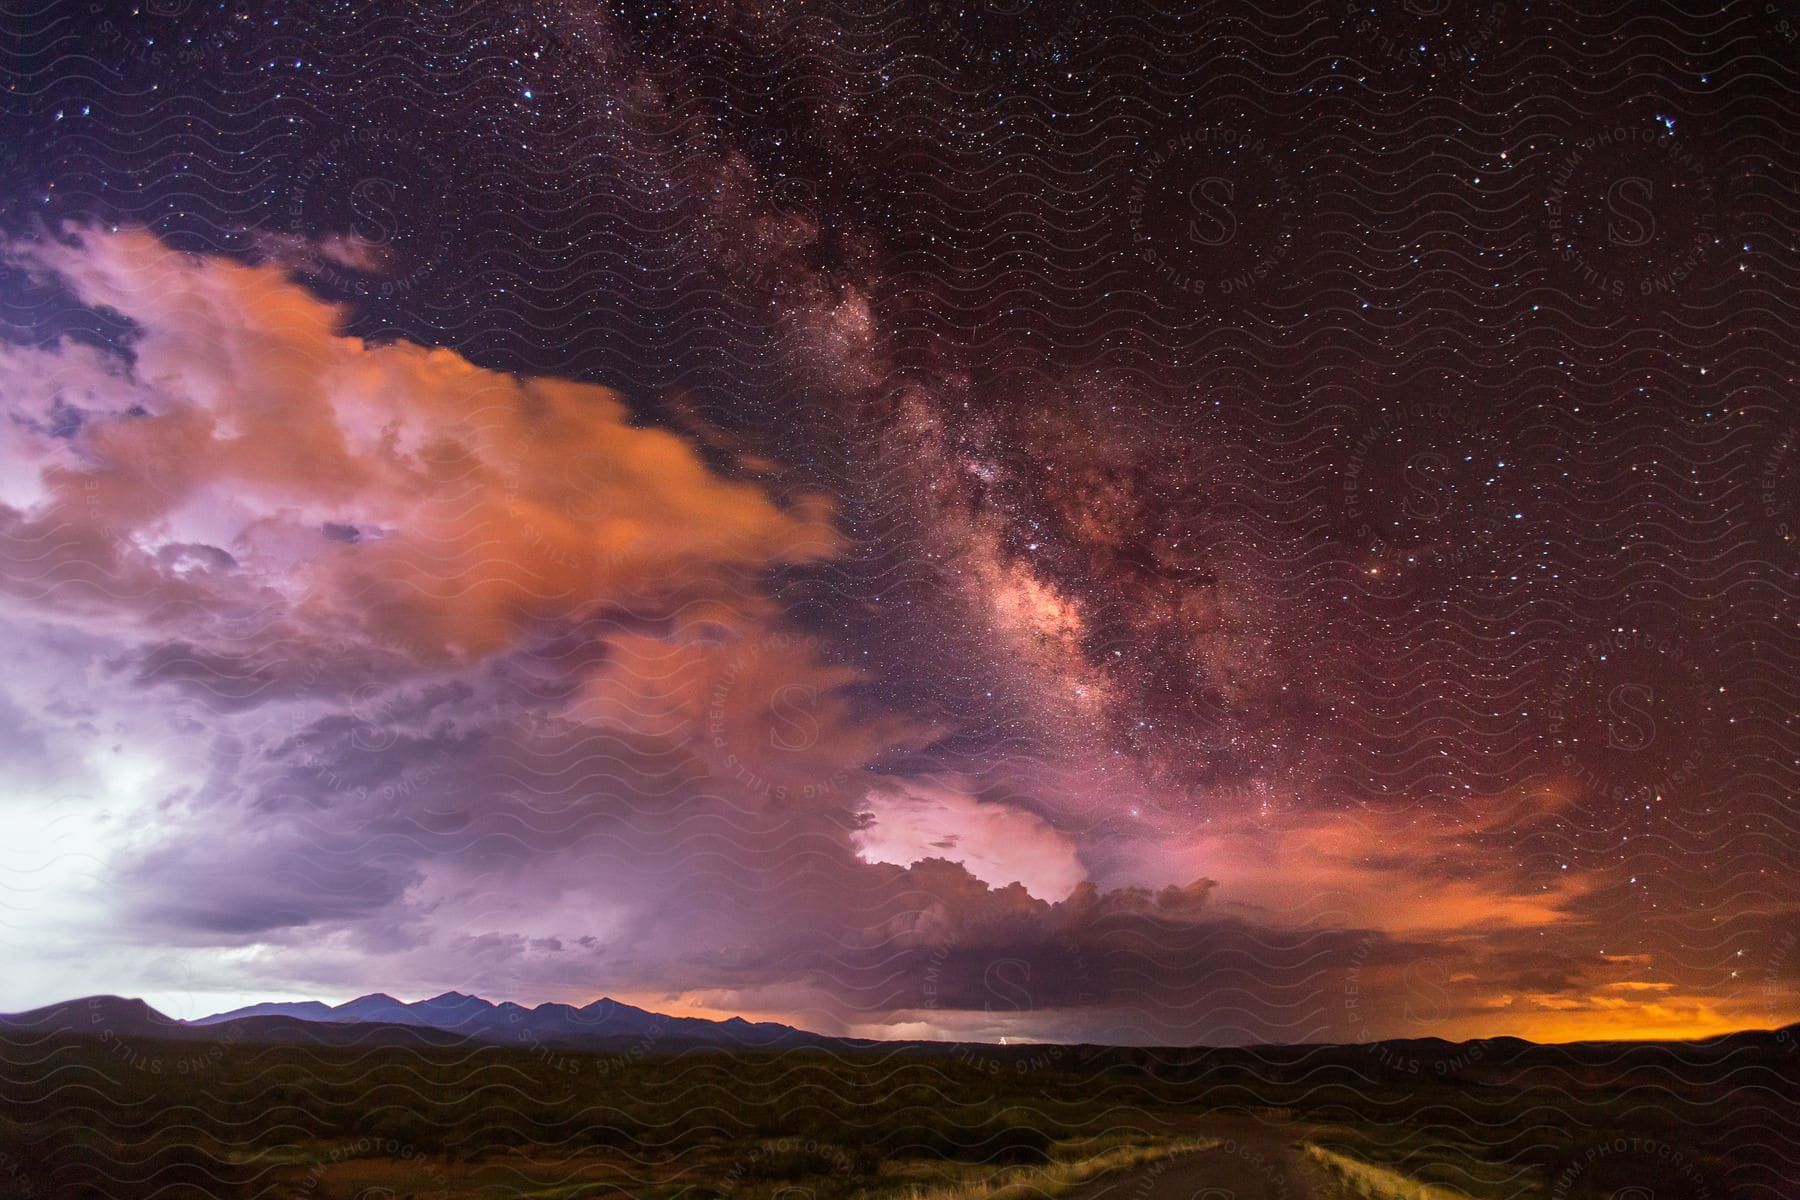 A clear night sky with a thunderstorm in the distance and the milky way shining overhead